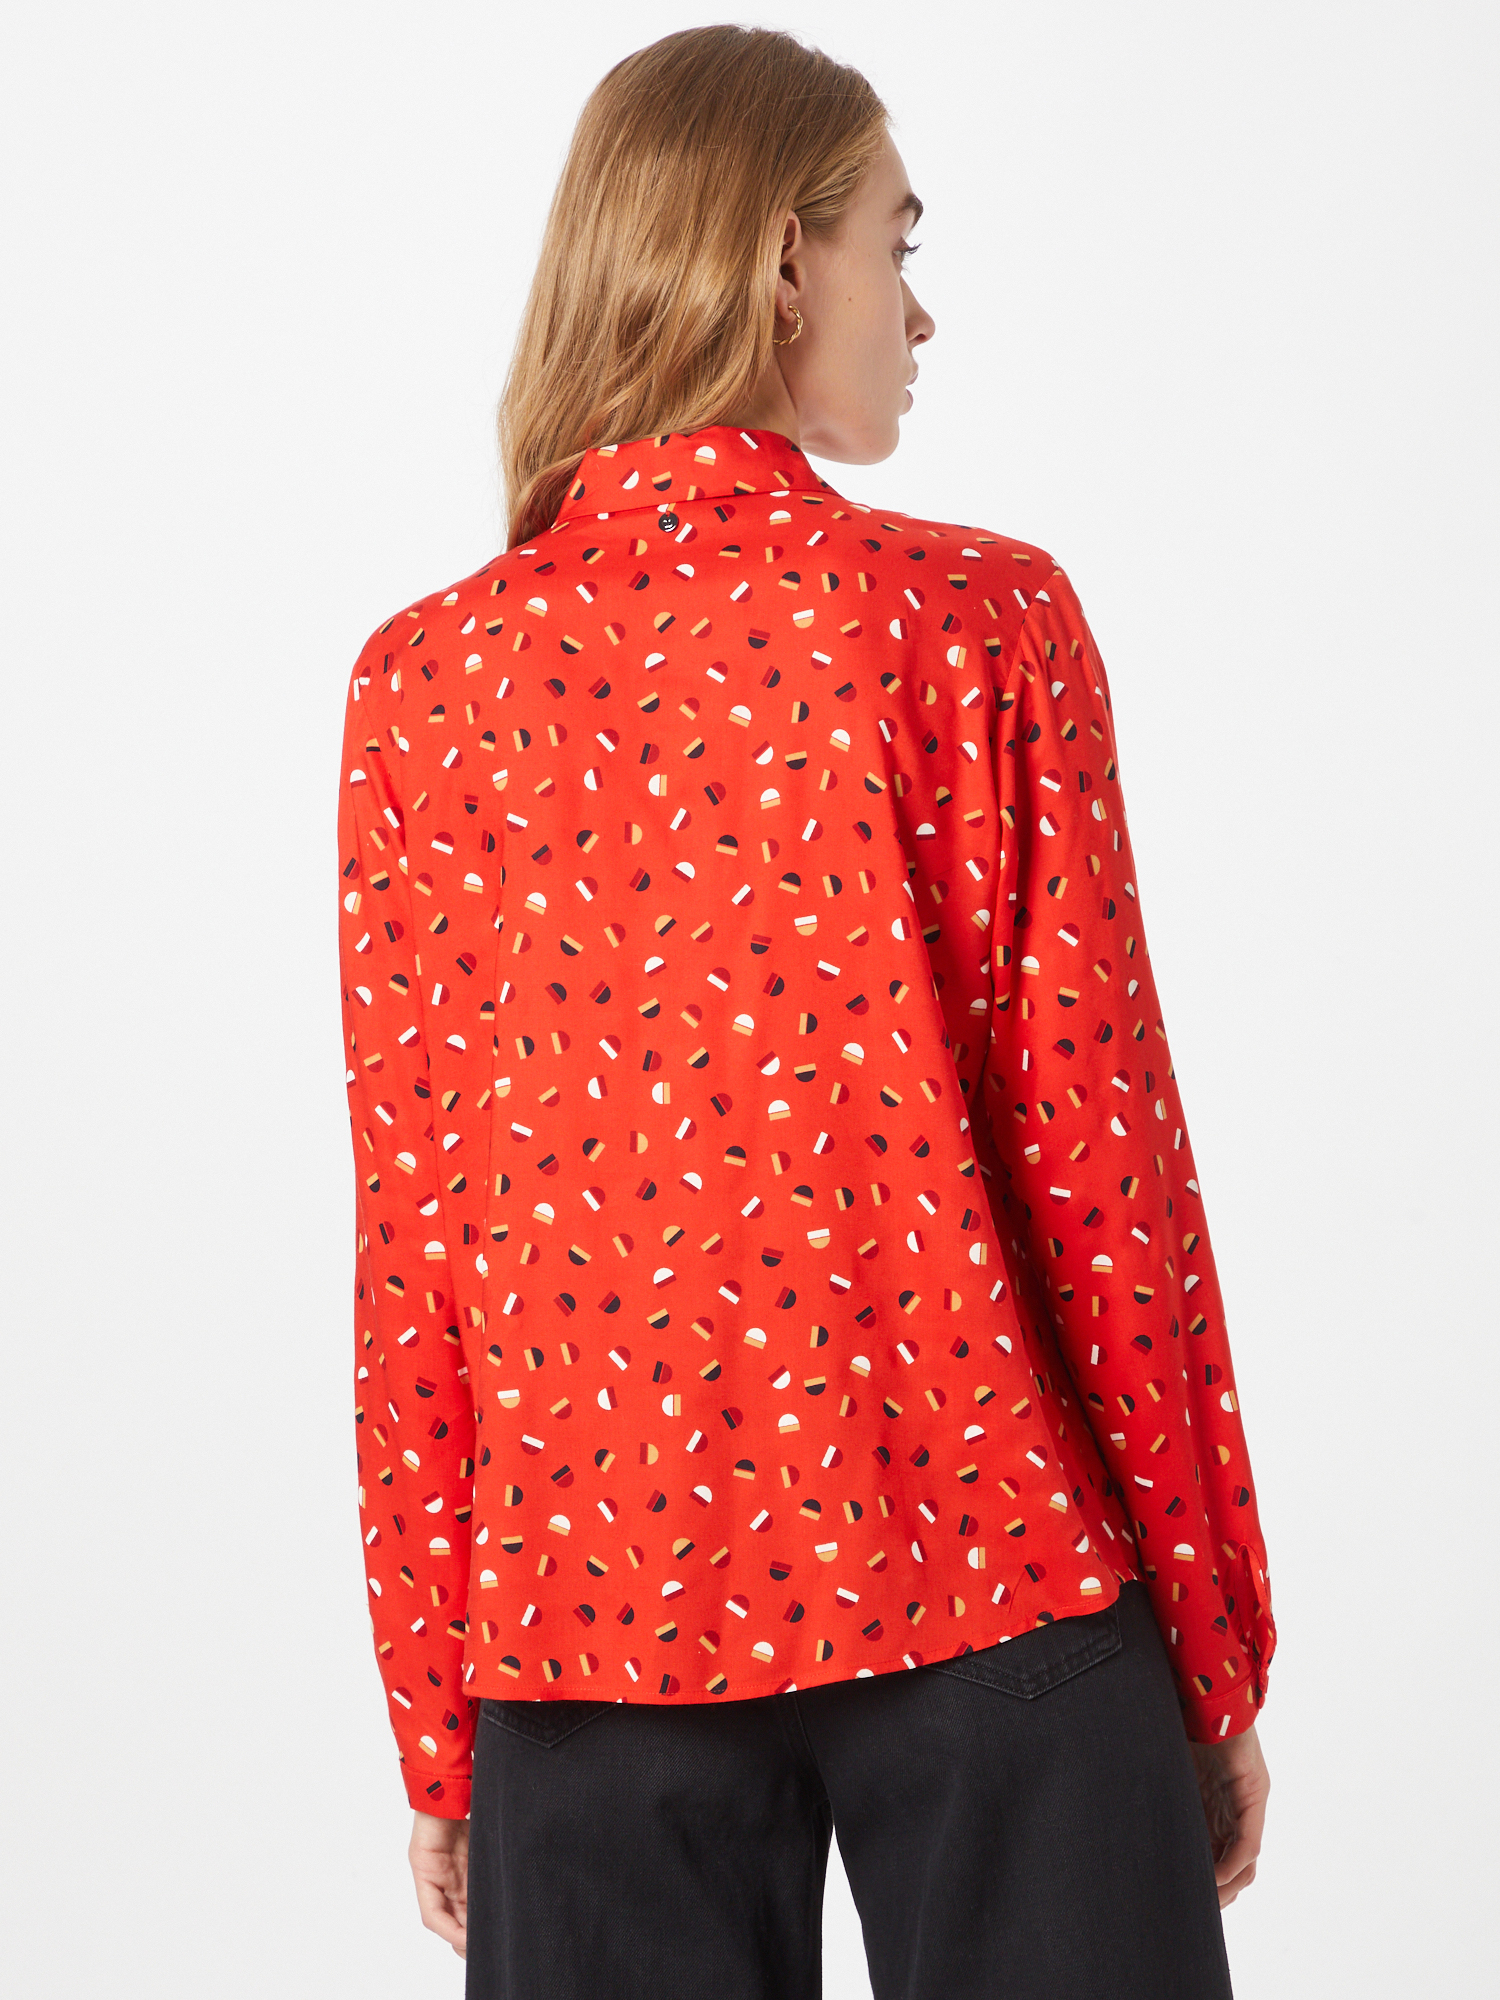 GERRY WEBER Bluse in Rot, Dunkelrot 